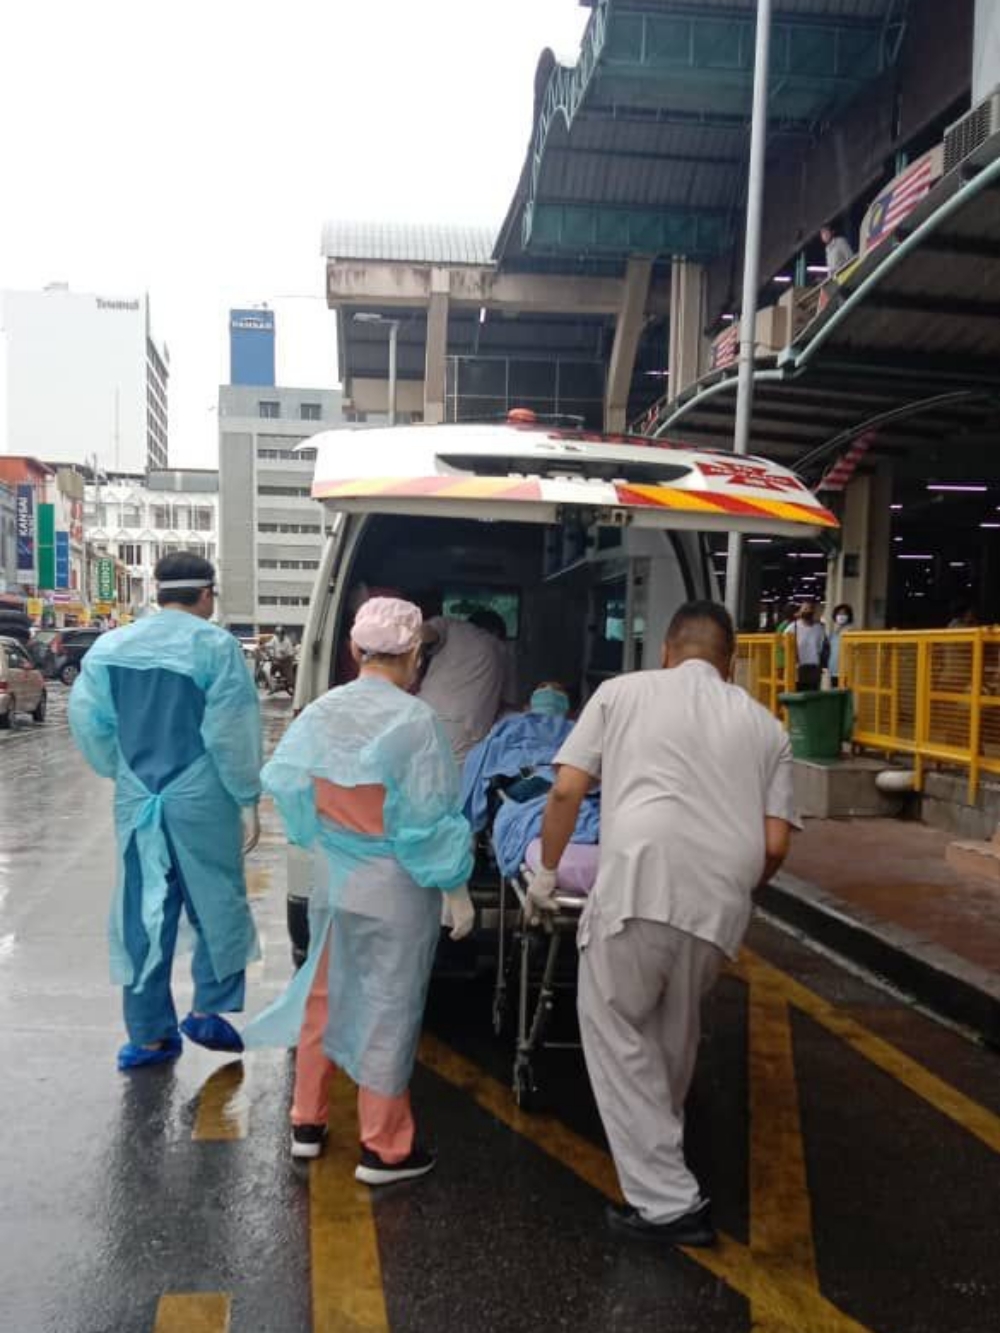 An elderly hawker receiving medical attention after she was said to have been pushed by another female trader. – Photo via WhatsApp/Albert Tiang